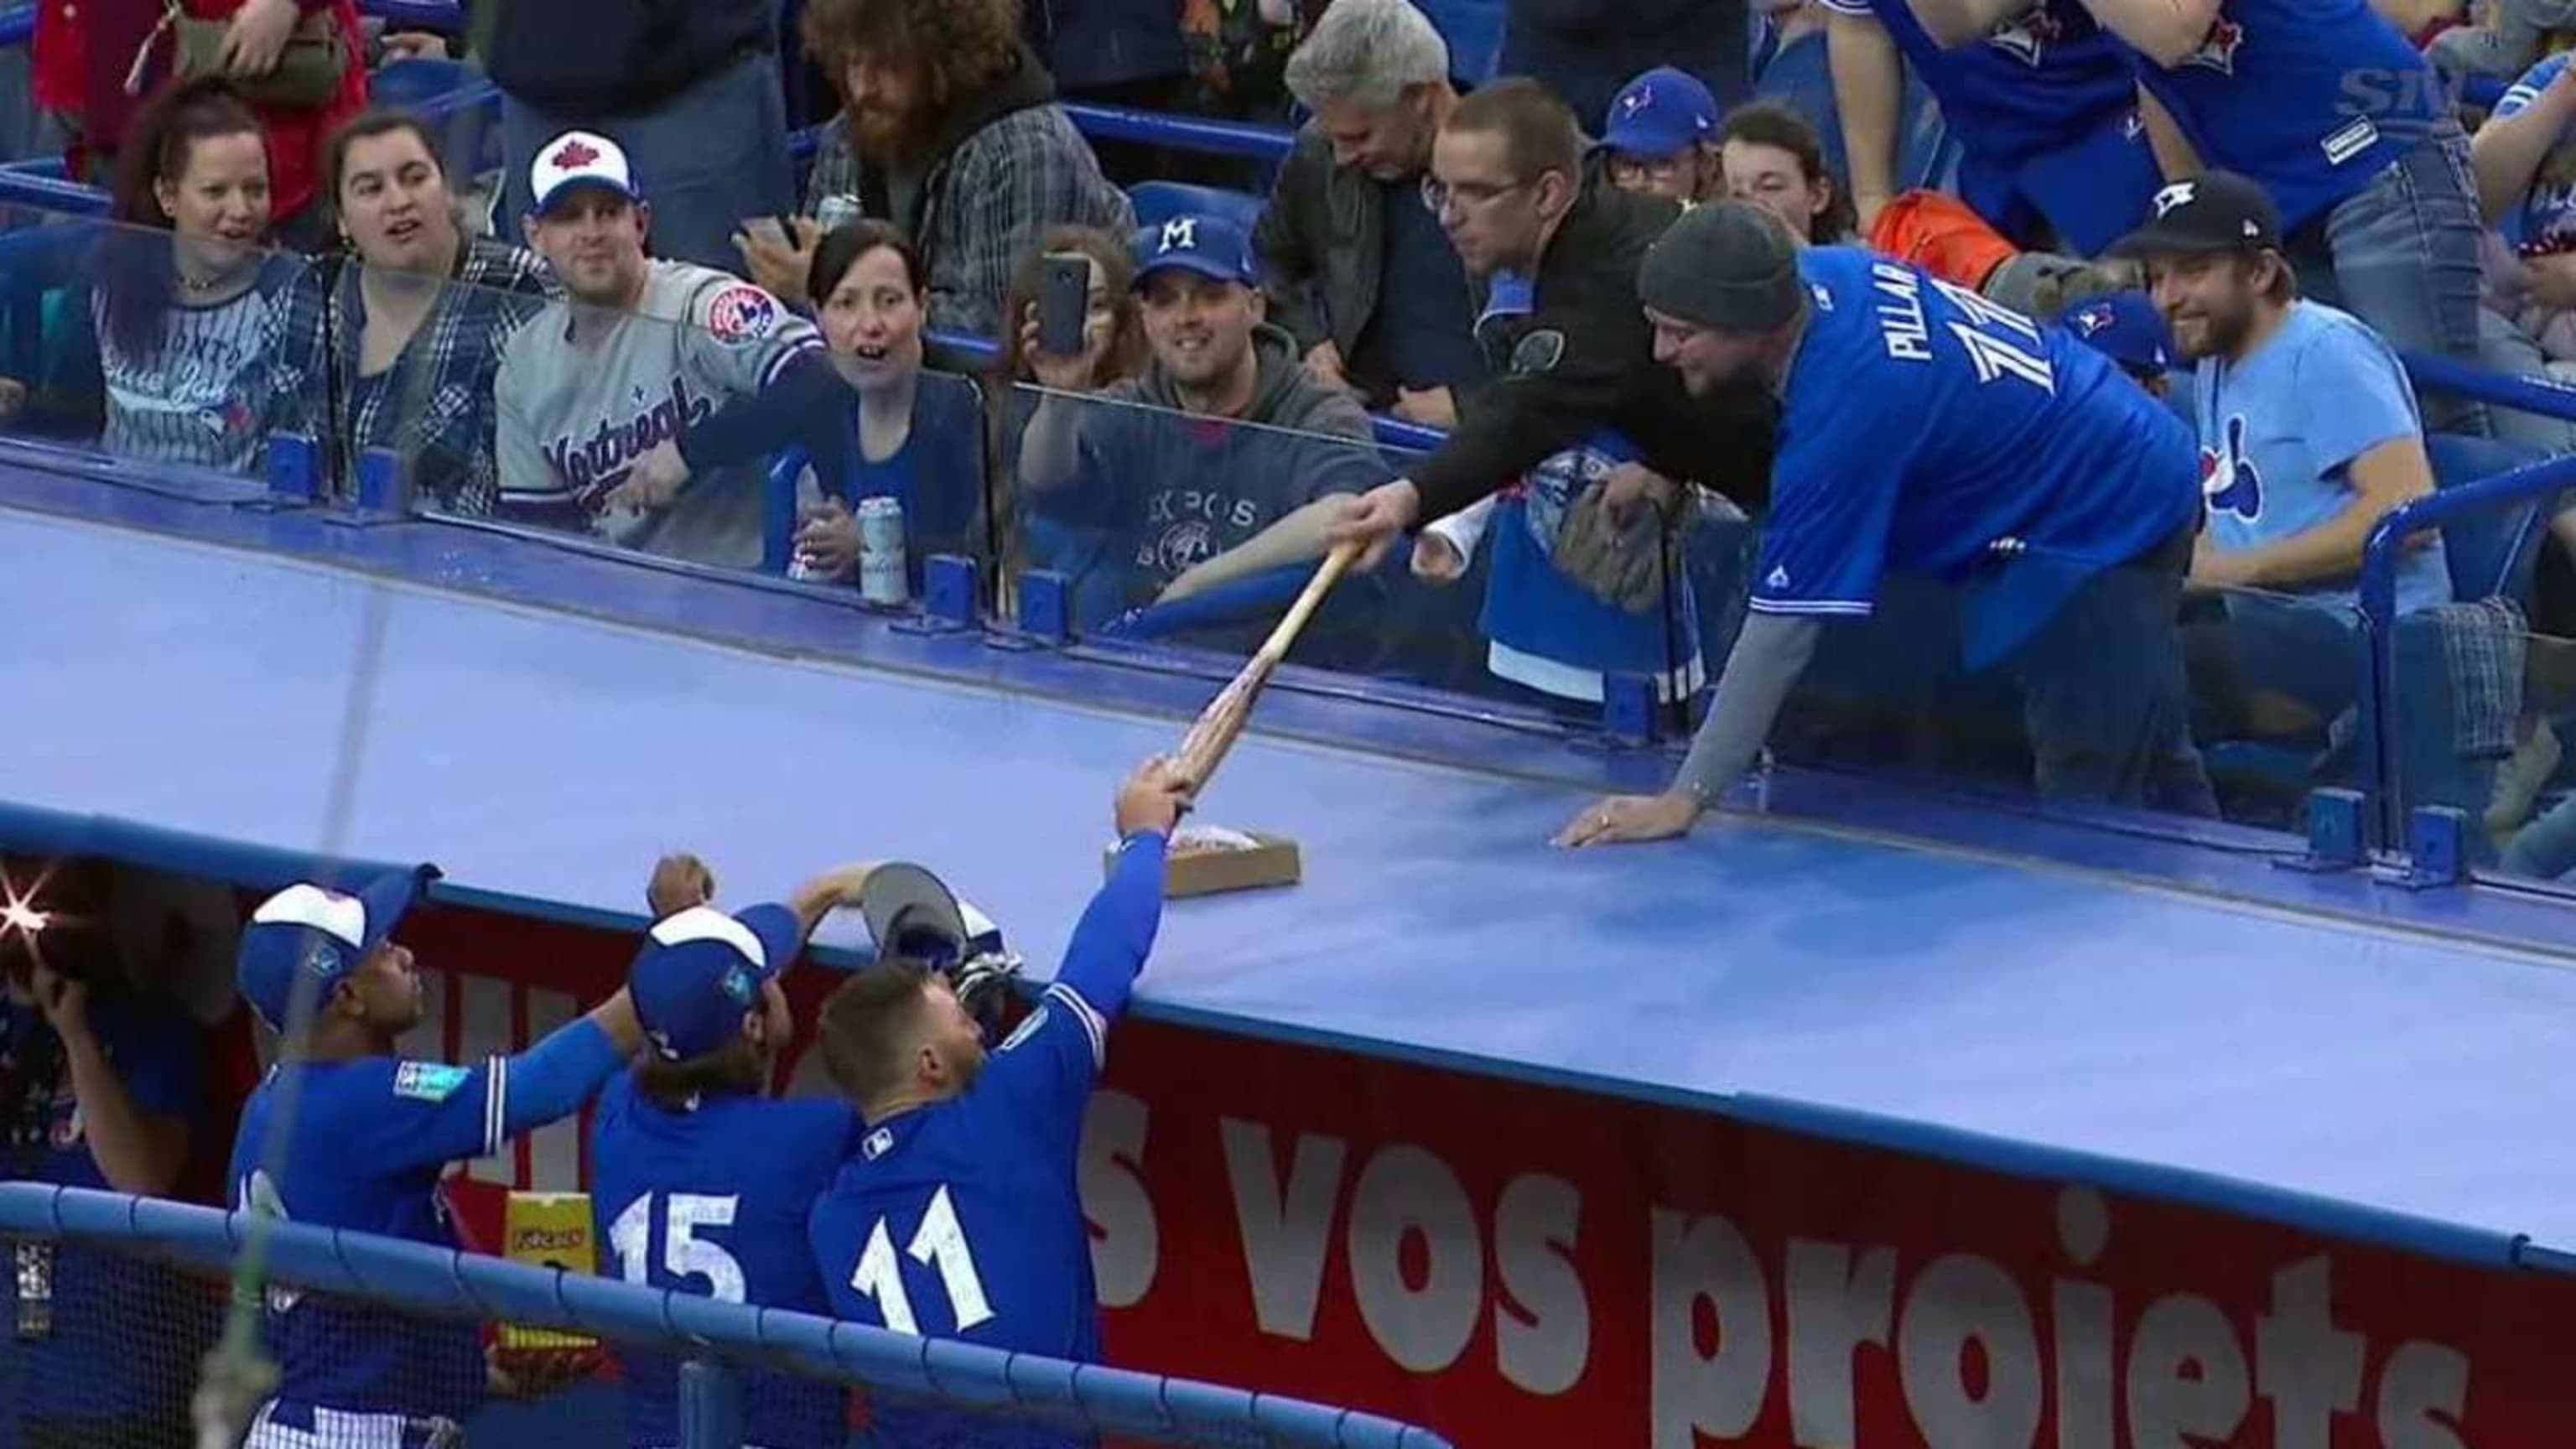 Blue Jays merchandise yanked from Mariners store after players